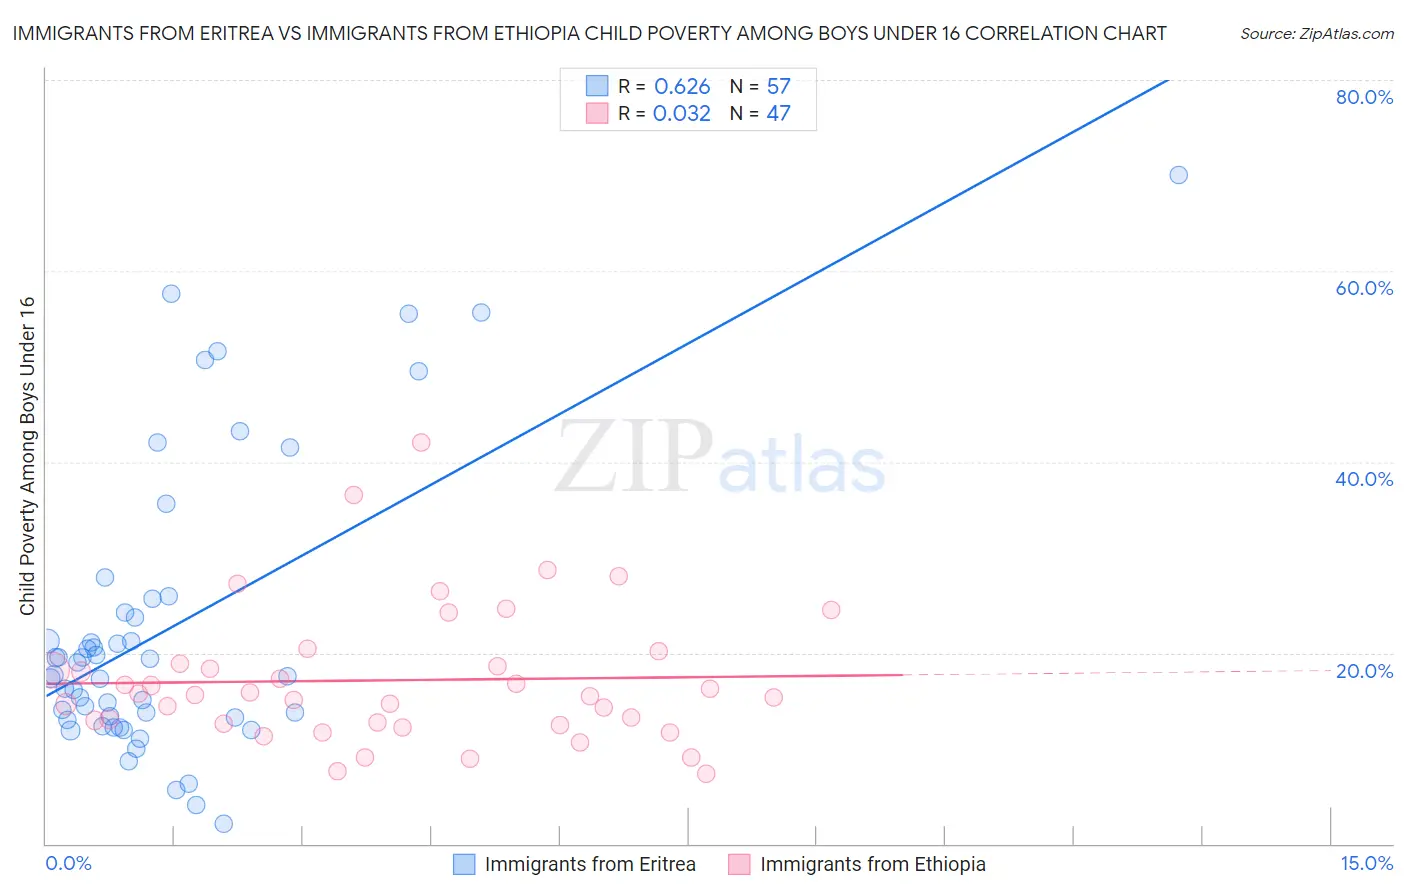 Immigrants from Eritrea vs Immigrants from Ethiopia Child Poverty Among Boys Under 16